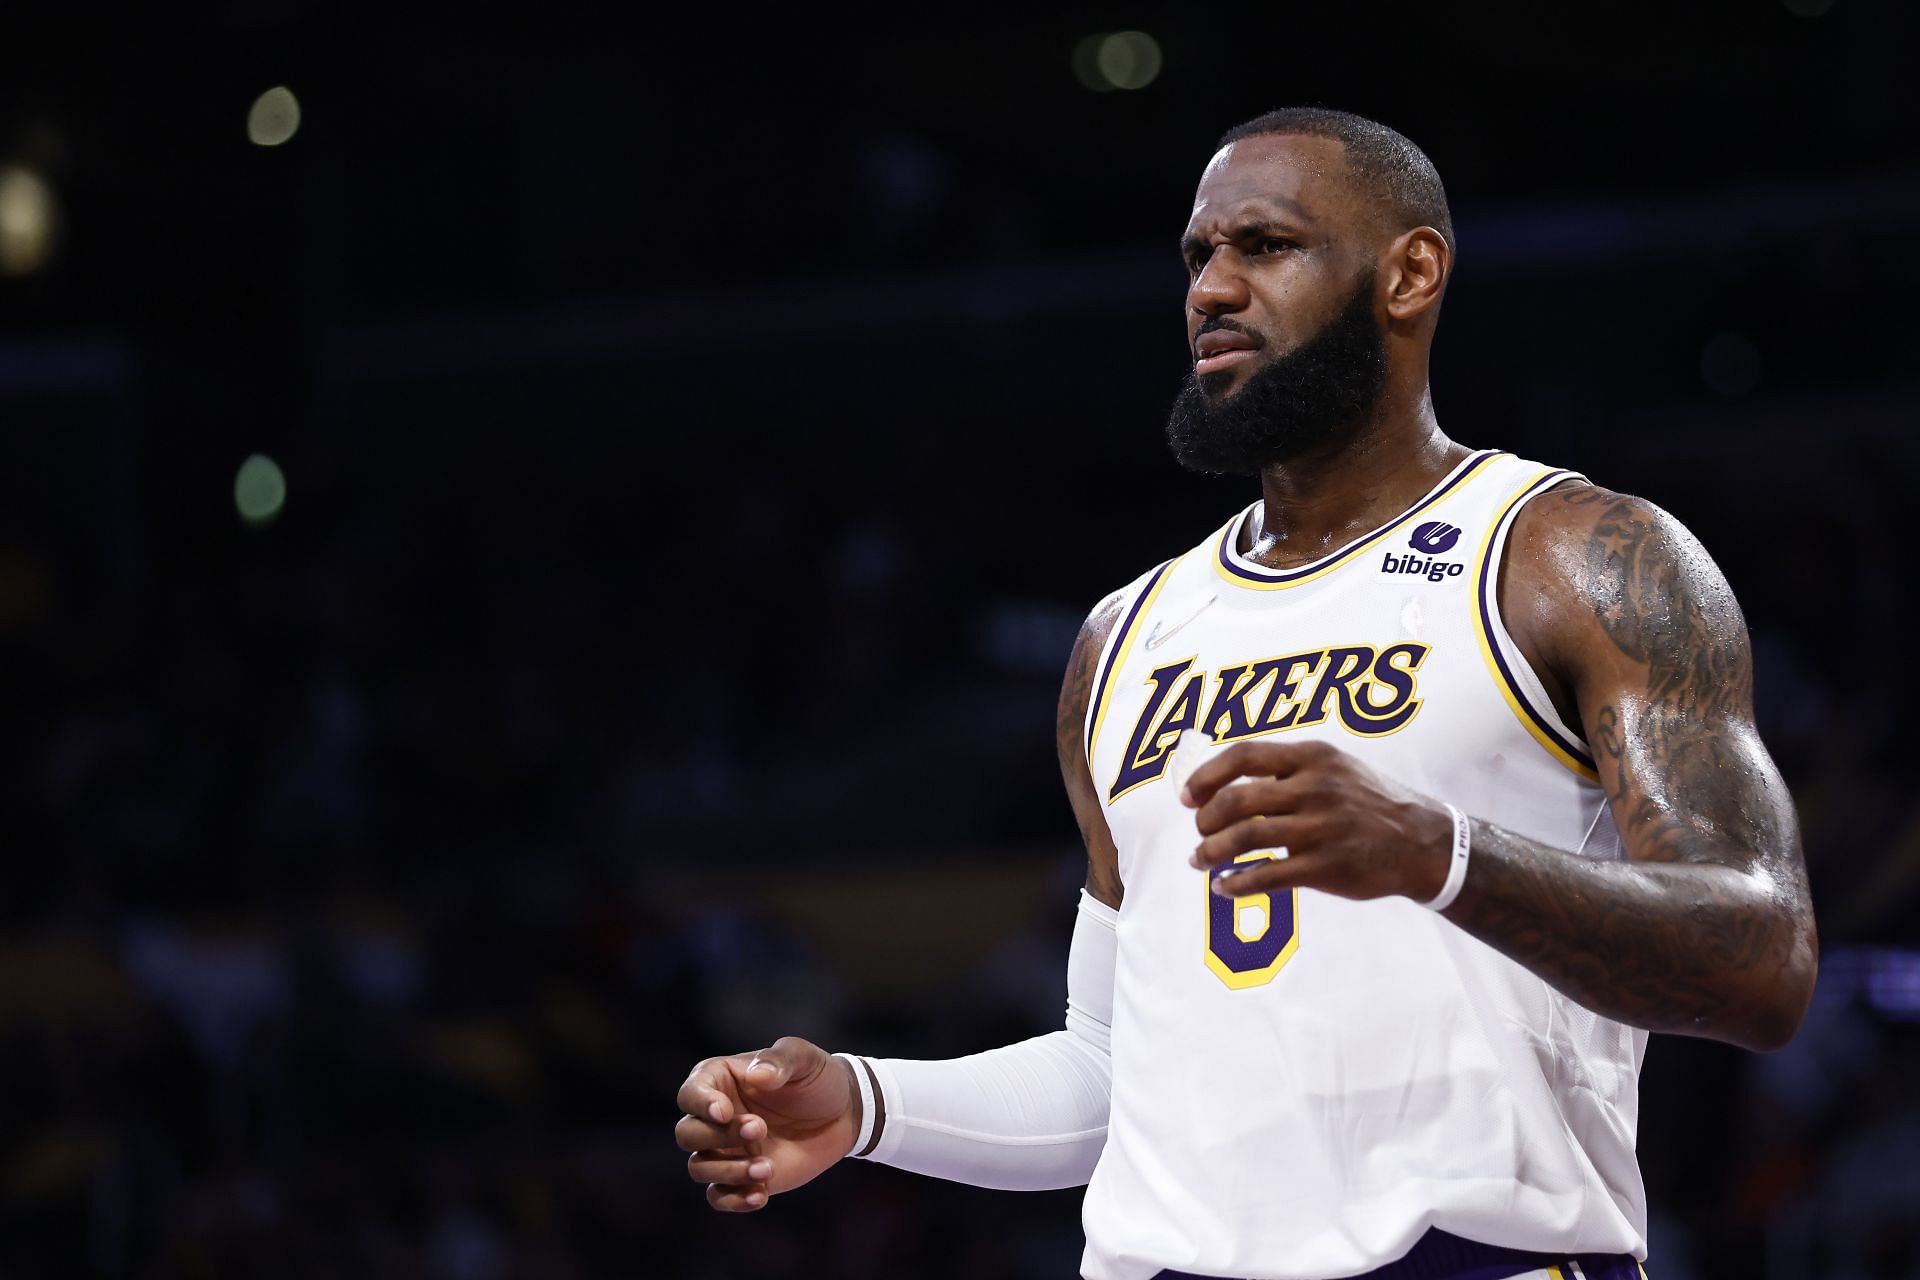 LeBron James wants the LA Lakers management to strengthen the team